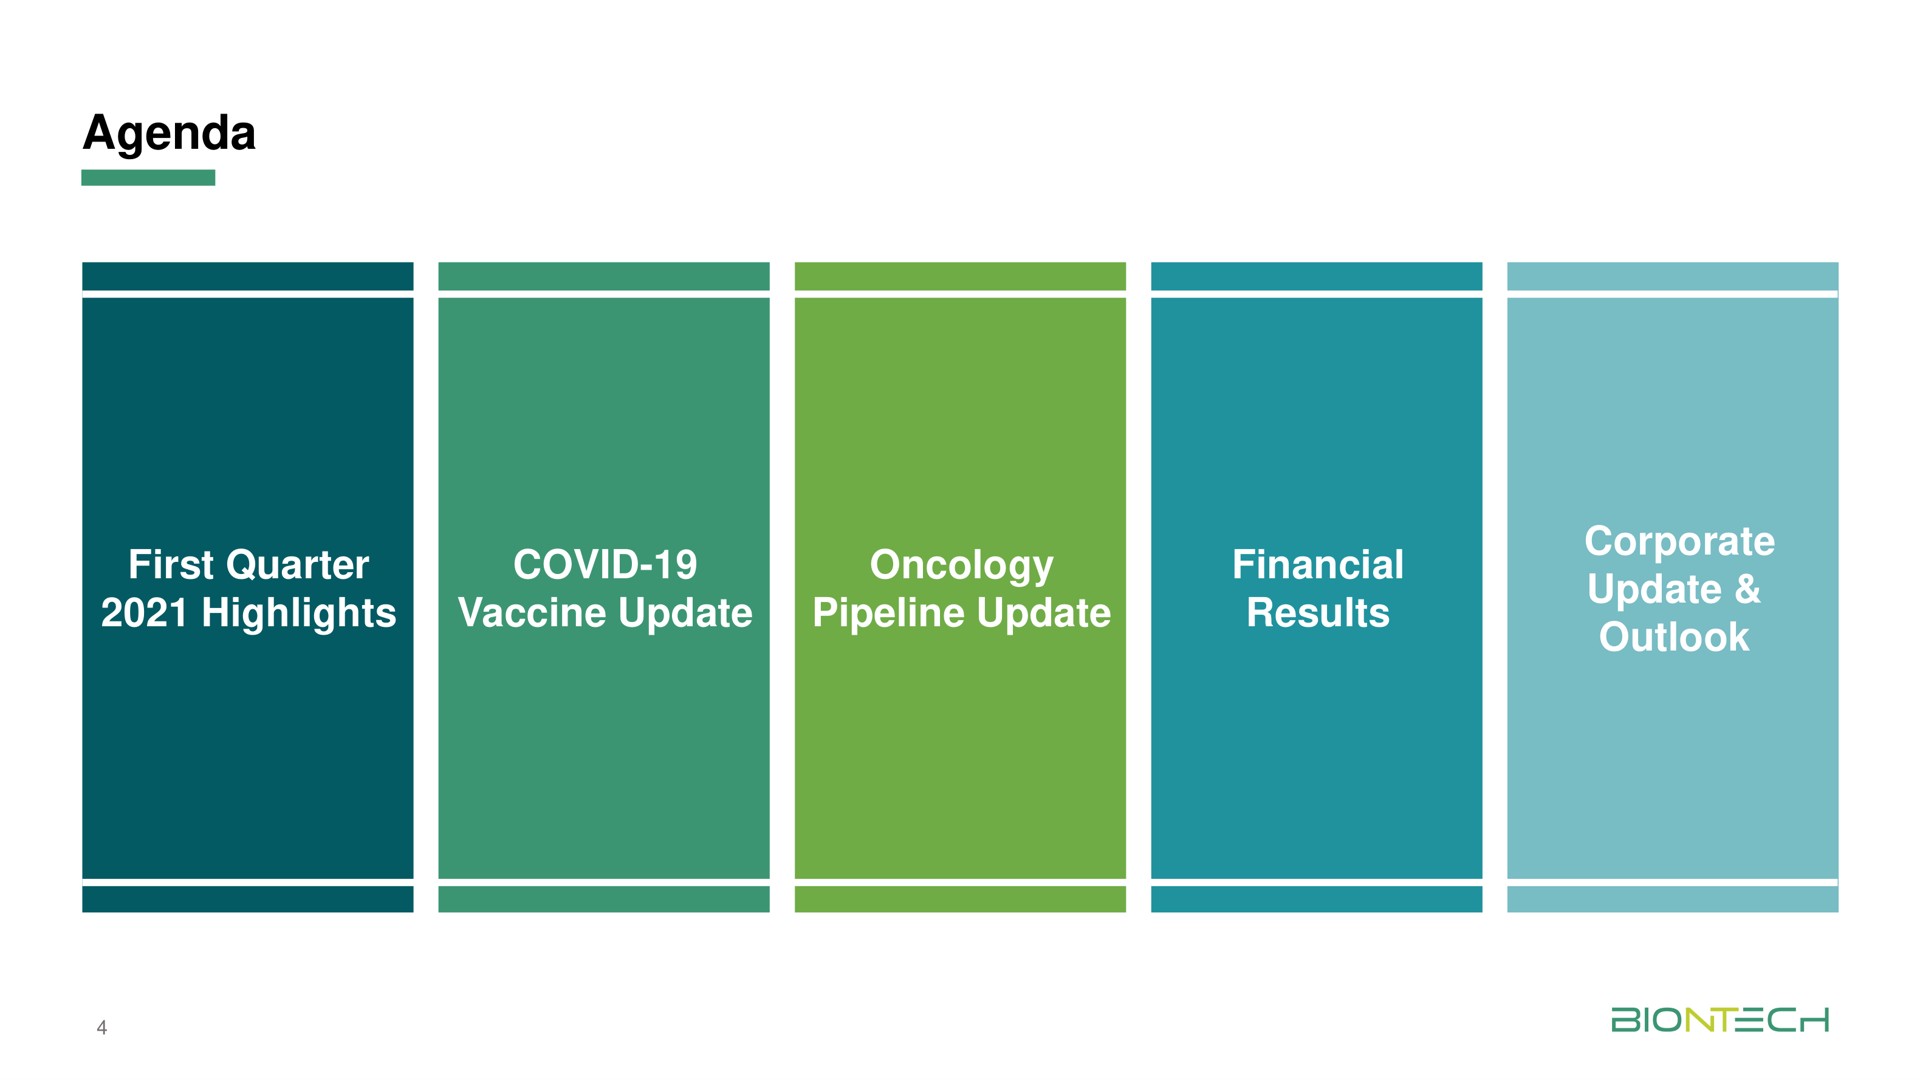 agenda first quarter highlights covid vaccine update oncology pipeline update financial results corporate update outlook | BioNTech